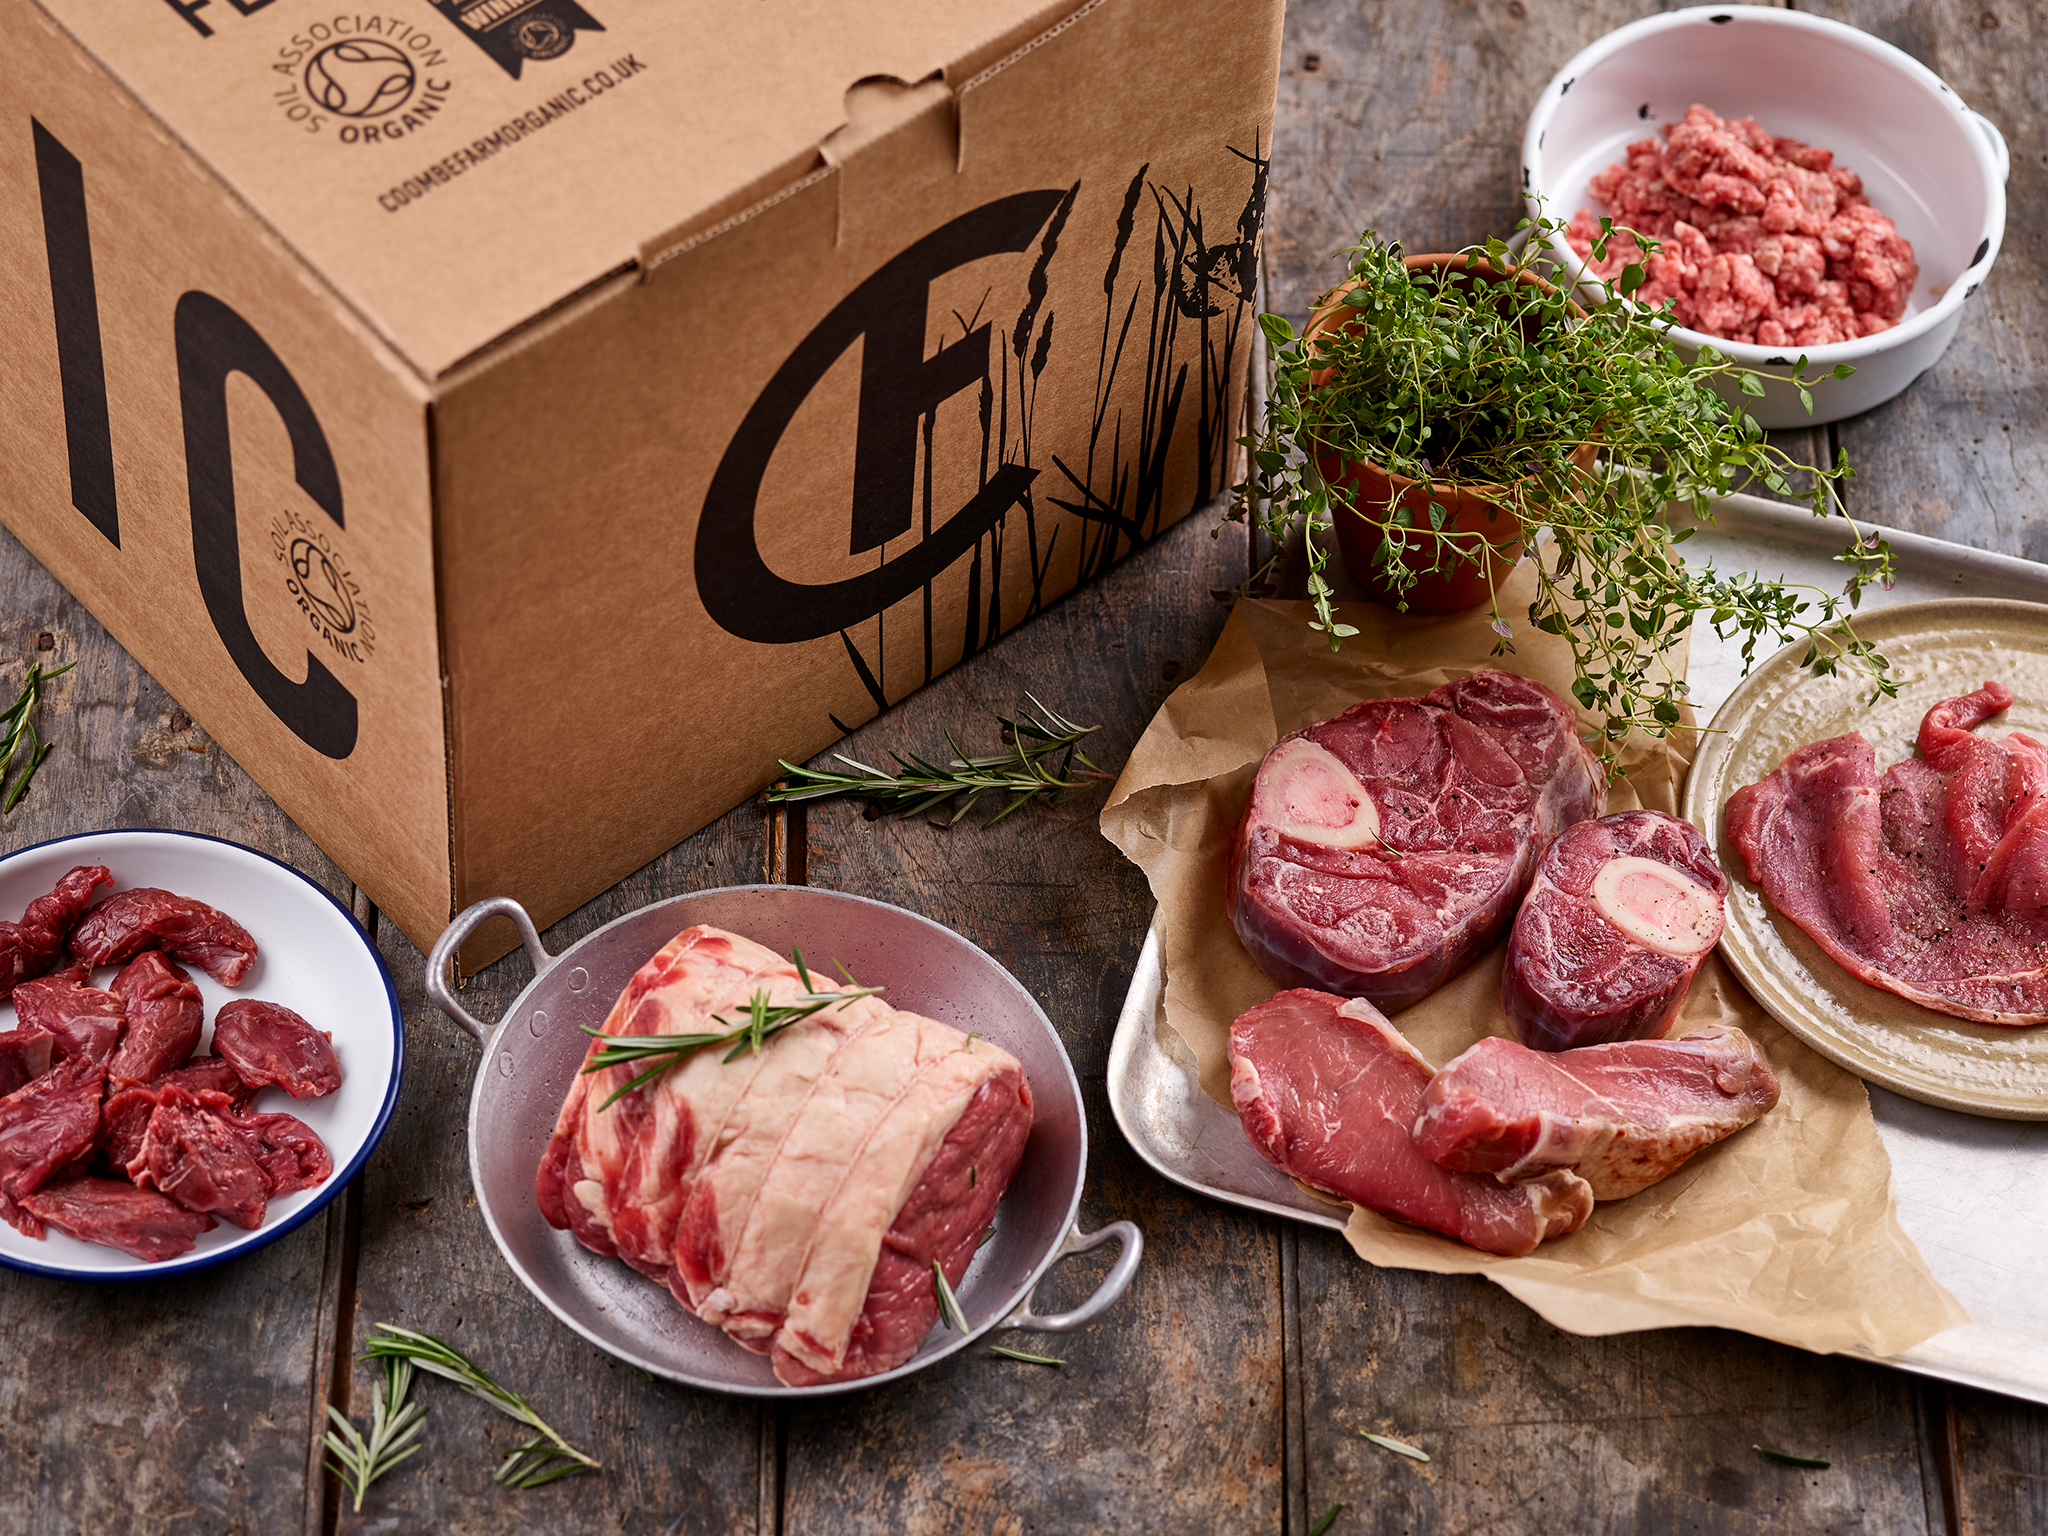 Best meat delivery box 9: Organic and free-range chicken, beef